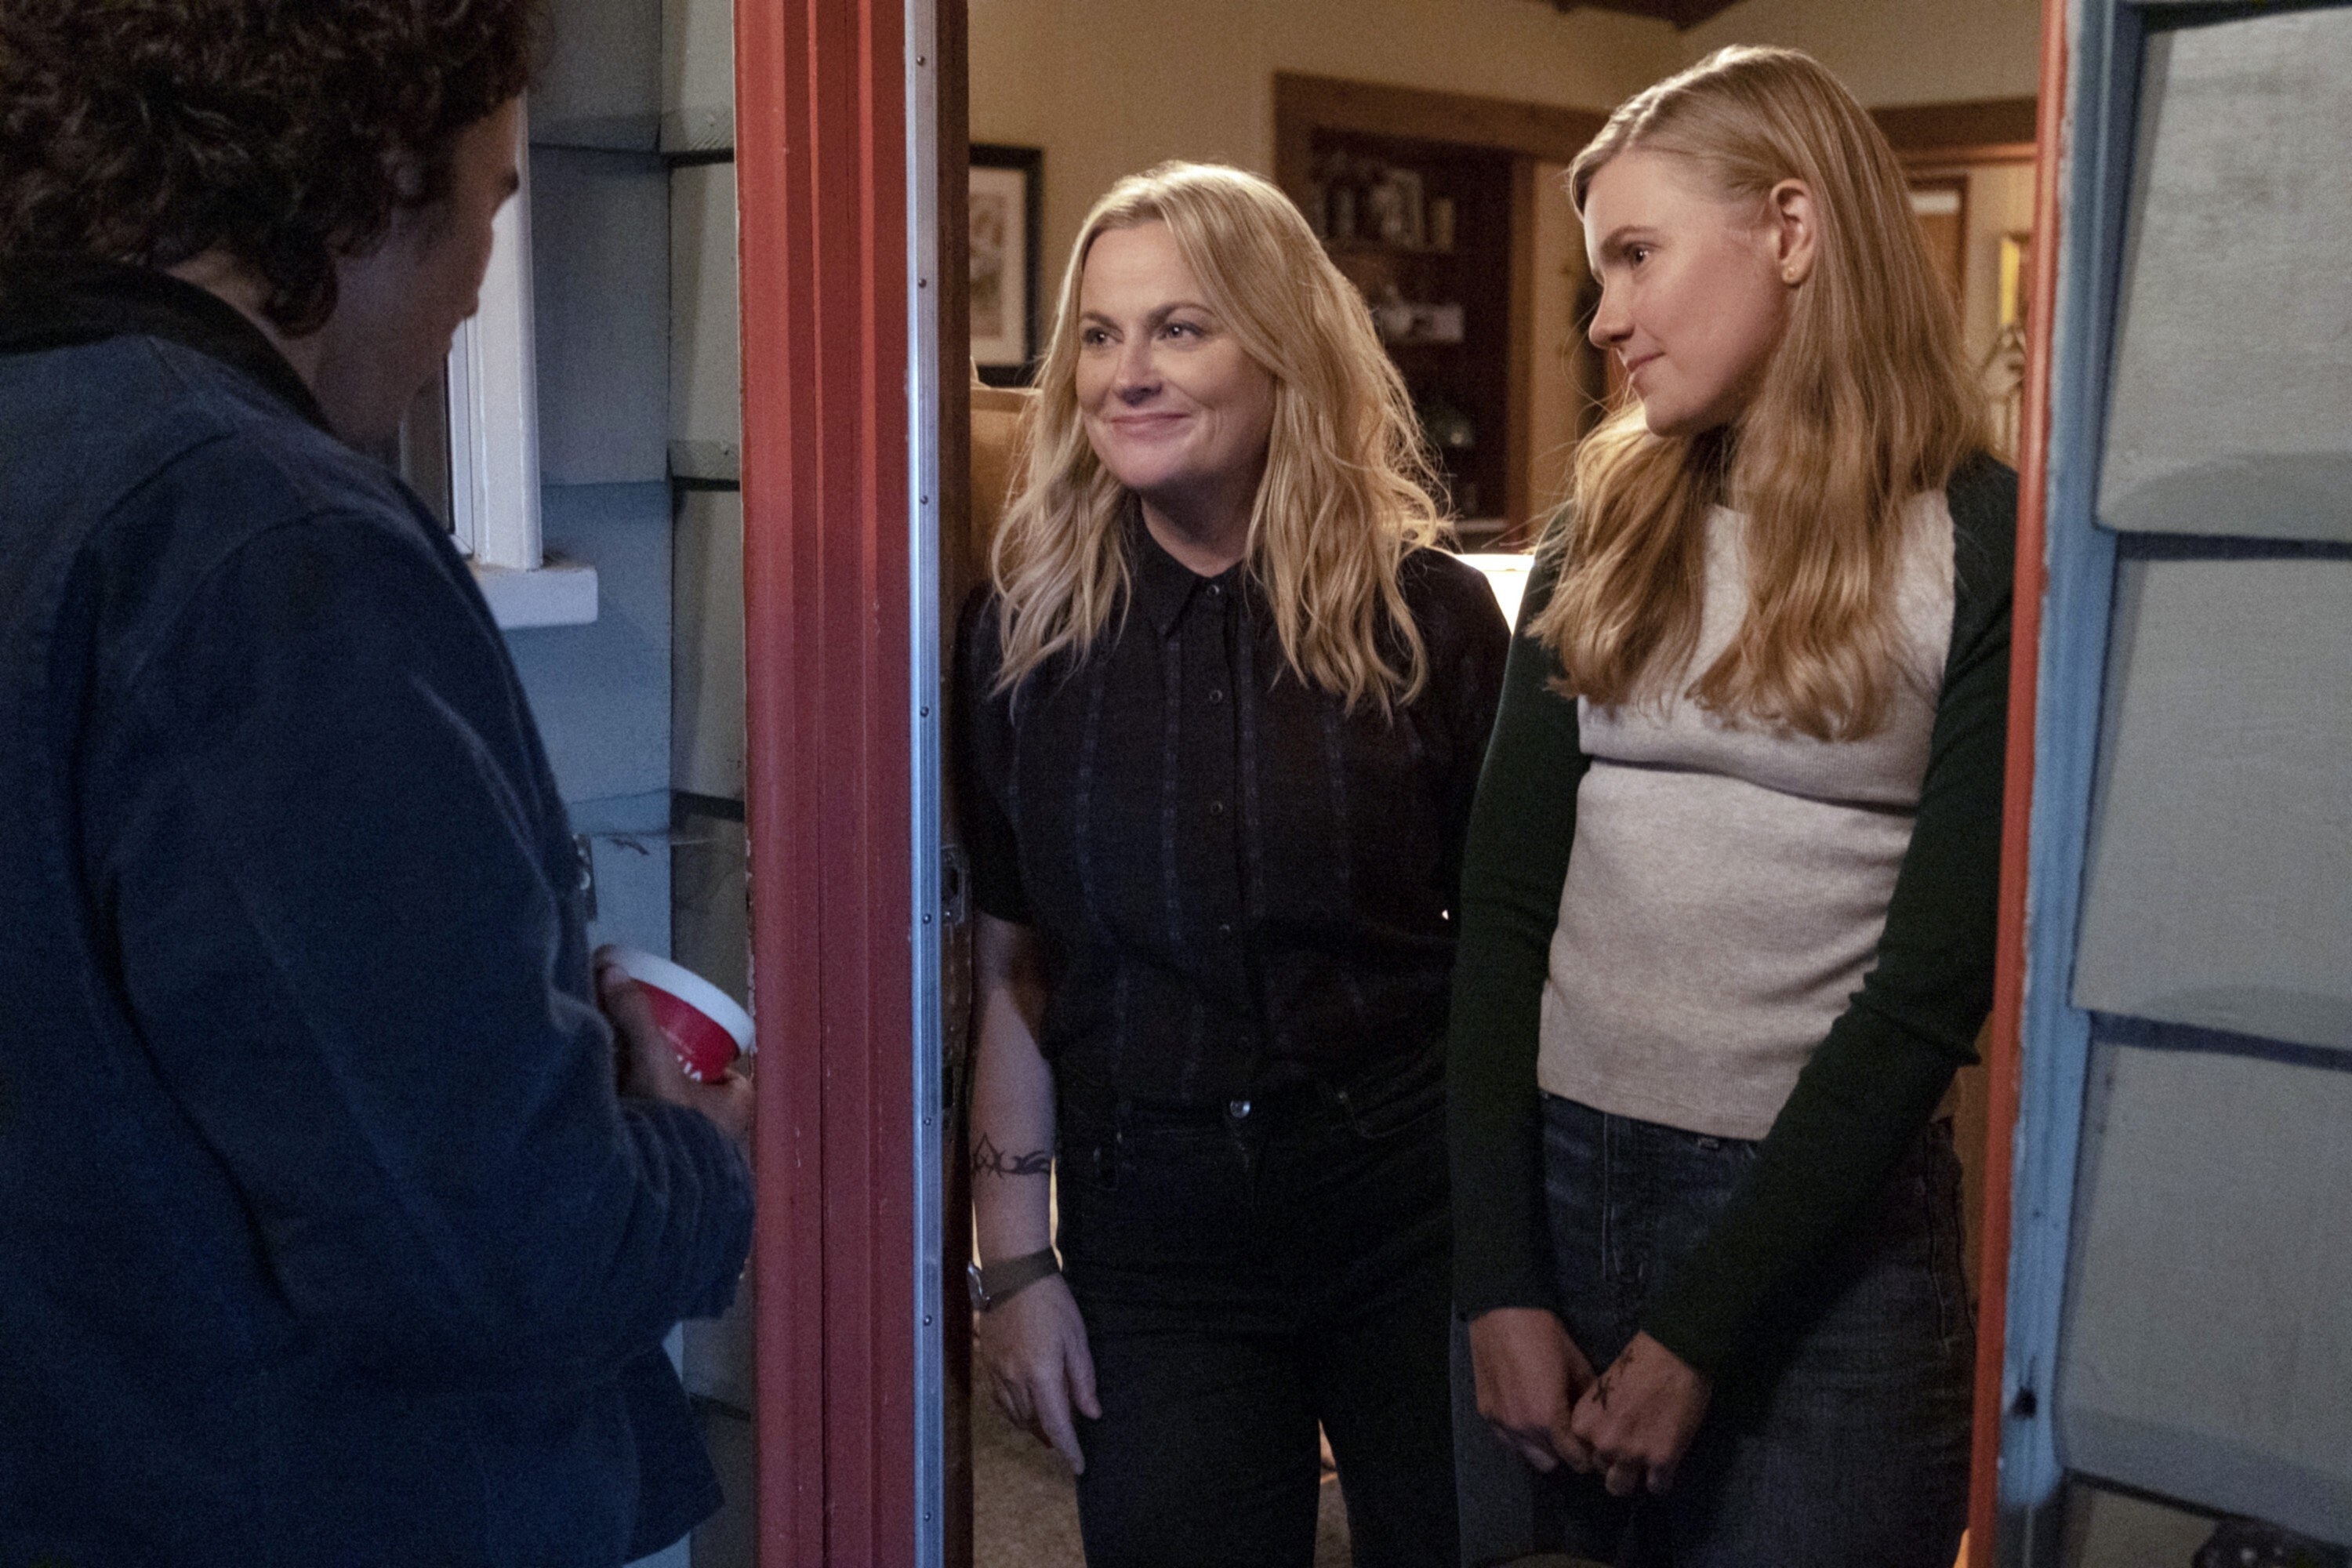 A white mother and daughter, both blonde, stand in the doorway of their home&#x27;s front door, looking at a man with brown hair. They both are smiling